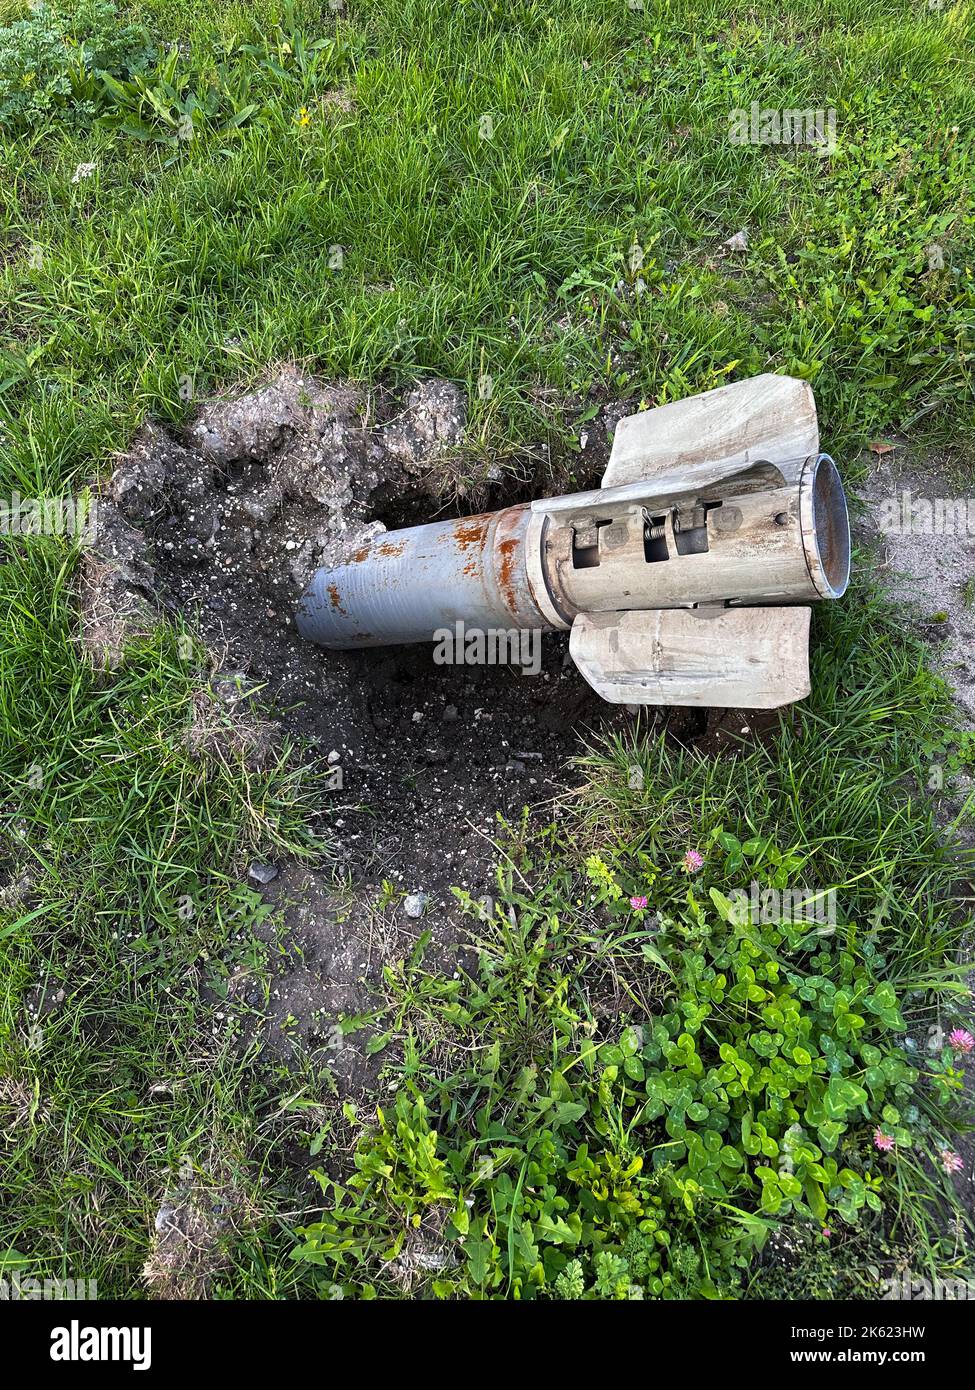 Russian MLRS Grad projectile in the ground next to grass on liberated from occupation territory of Ukraine. Result of Russian bombardment. Concept of Stock Photo